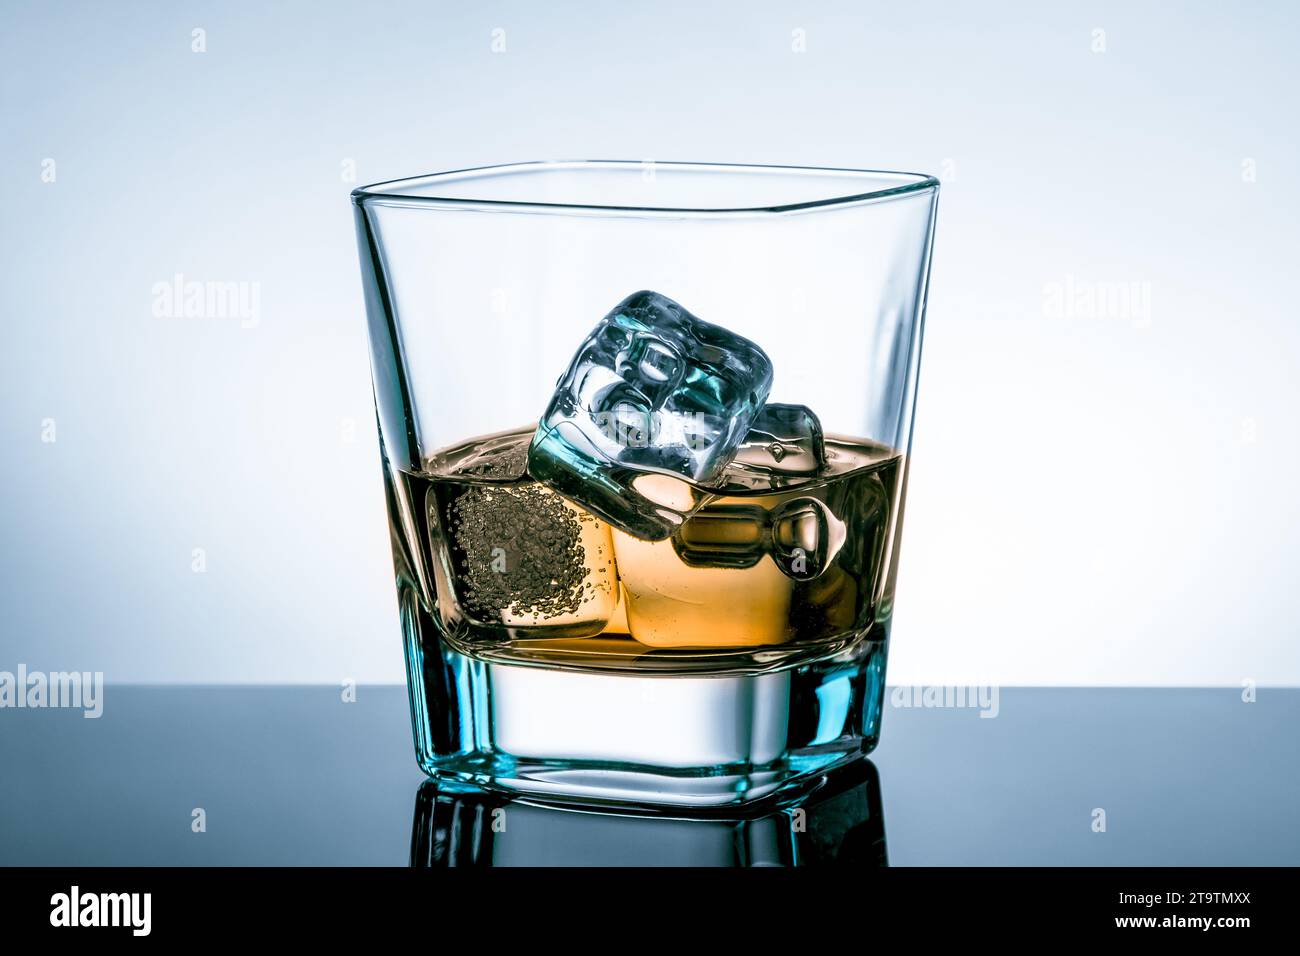 https://c8.alamy.com/comp/2T9TMXX/glass-of-whiskey-with-ice-cubes-on-bar-table-with-reflection-on-light-blue-tint-background-time-of-relax-with-whisky-2T9TMXX.jpg